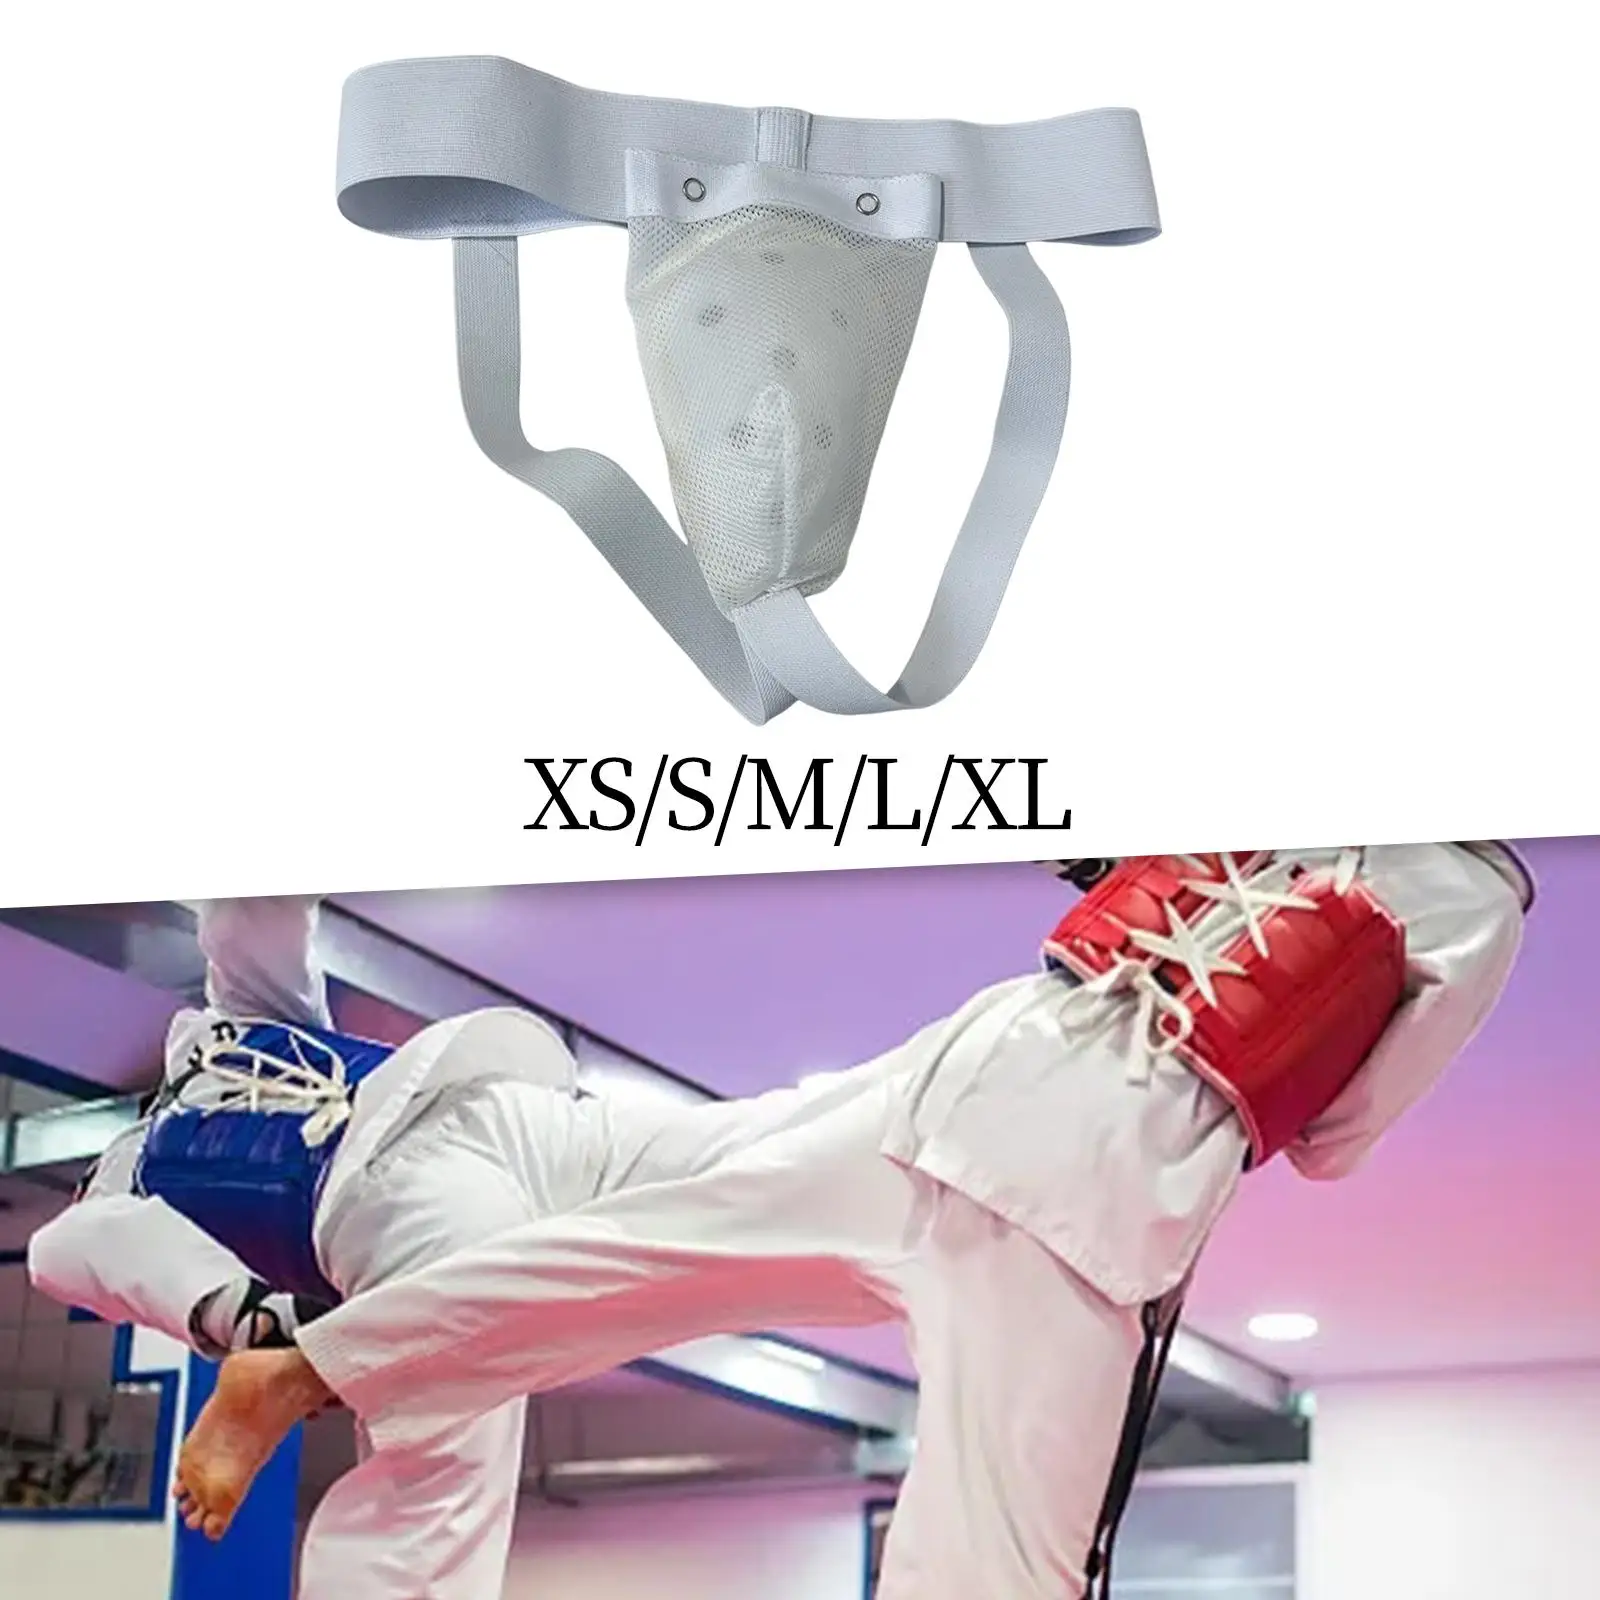 Protection Muay Thai Adjustable Groin Protector Cup Karate Taekwondo Groin Guard for Training Boxing Kung Fu Practice Sparring